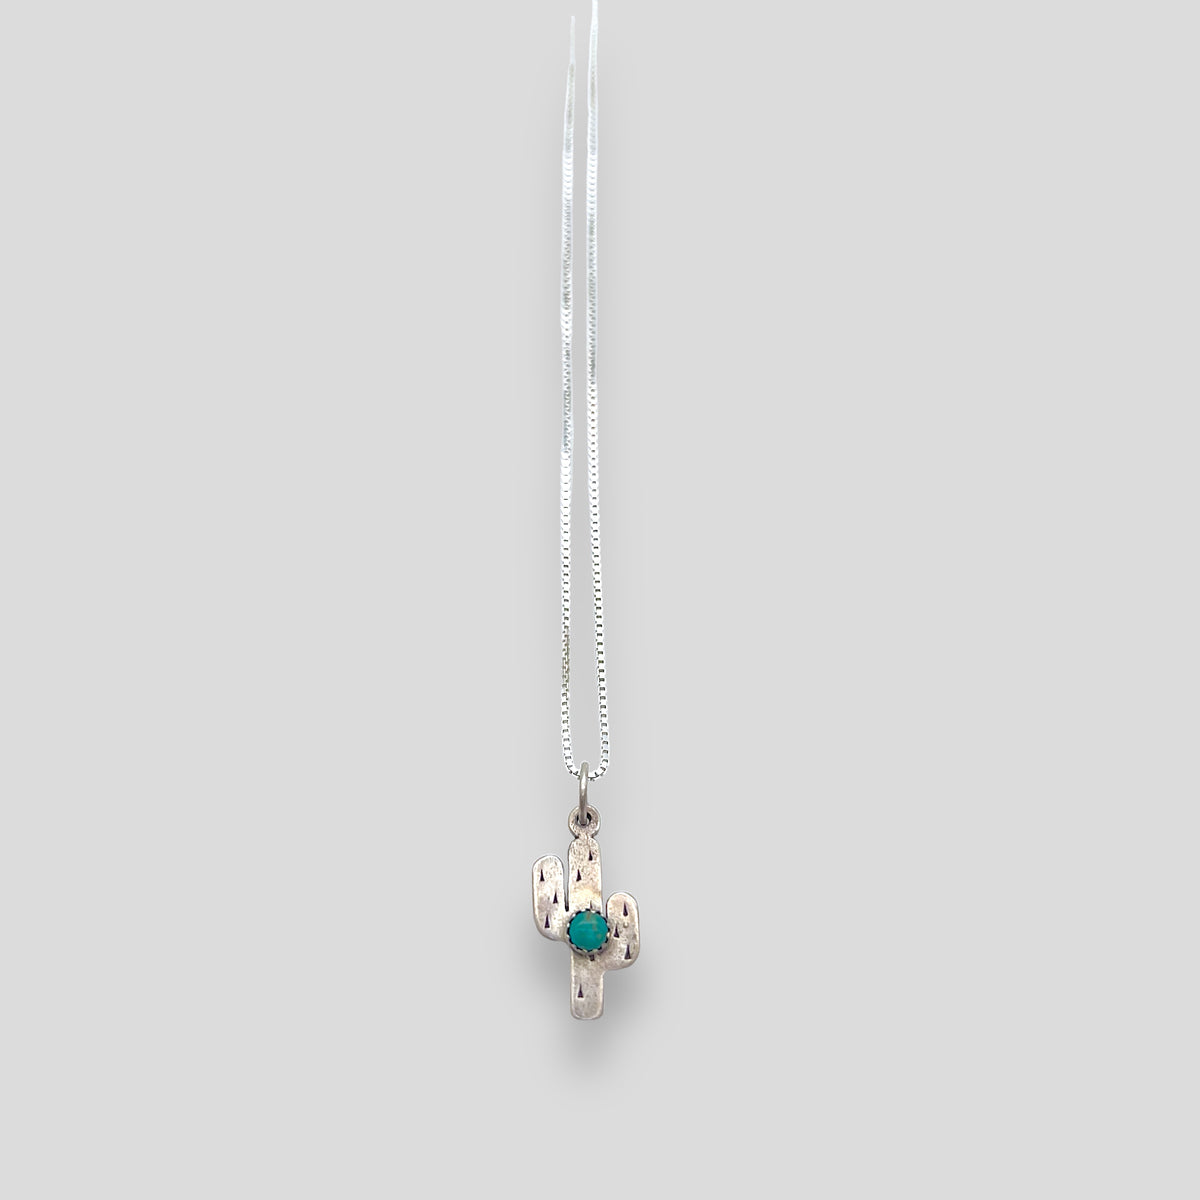 Small Turquoise and Sterling Silver Thick Saguaro Pendant Necklace